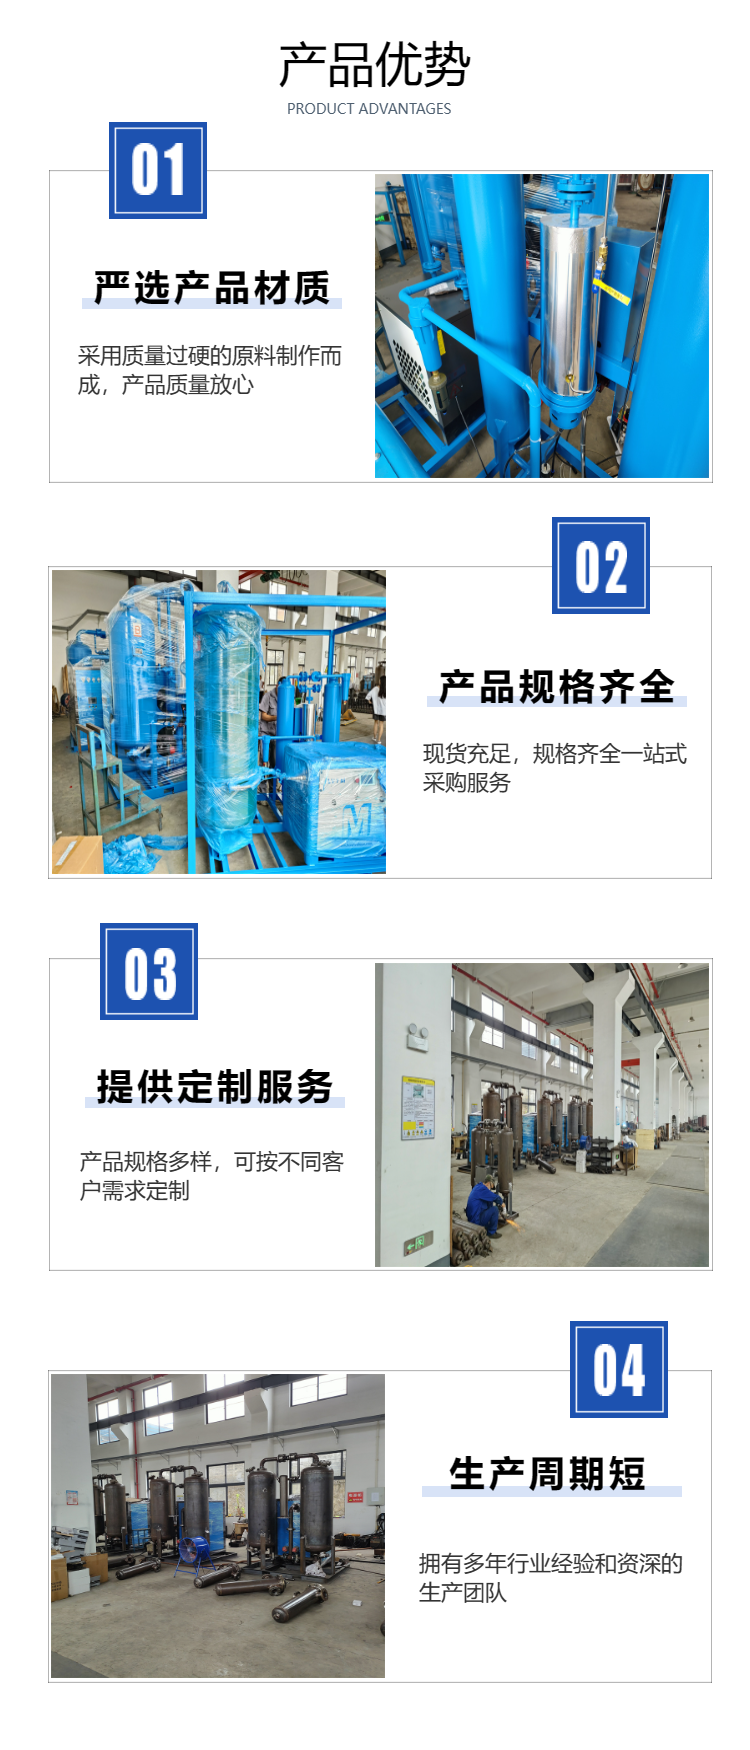 Blown air dryer, micro heat, no heat suction dryer, air dehydration, oil removal, purification treatment, compressor post treatment